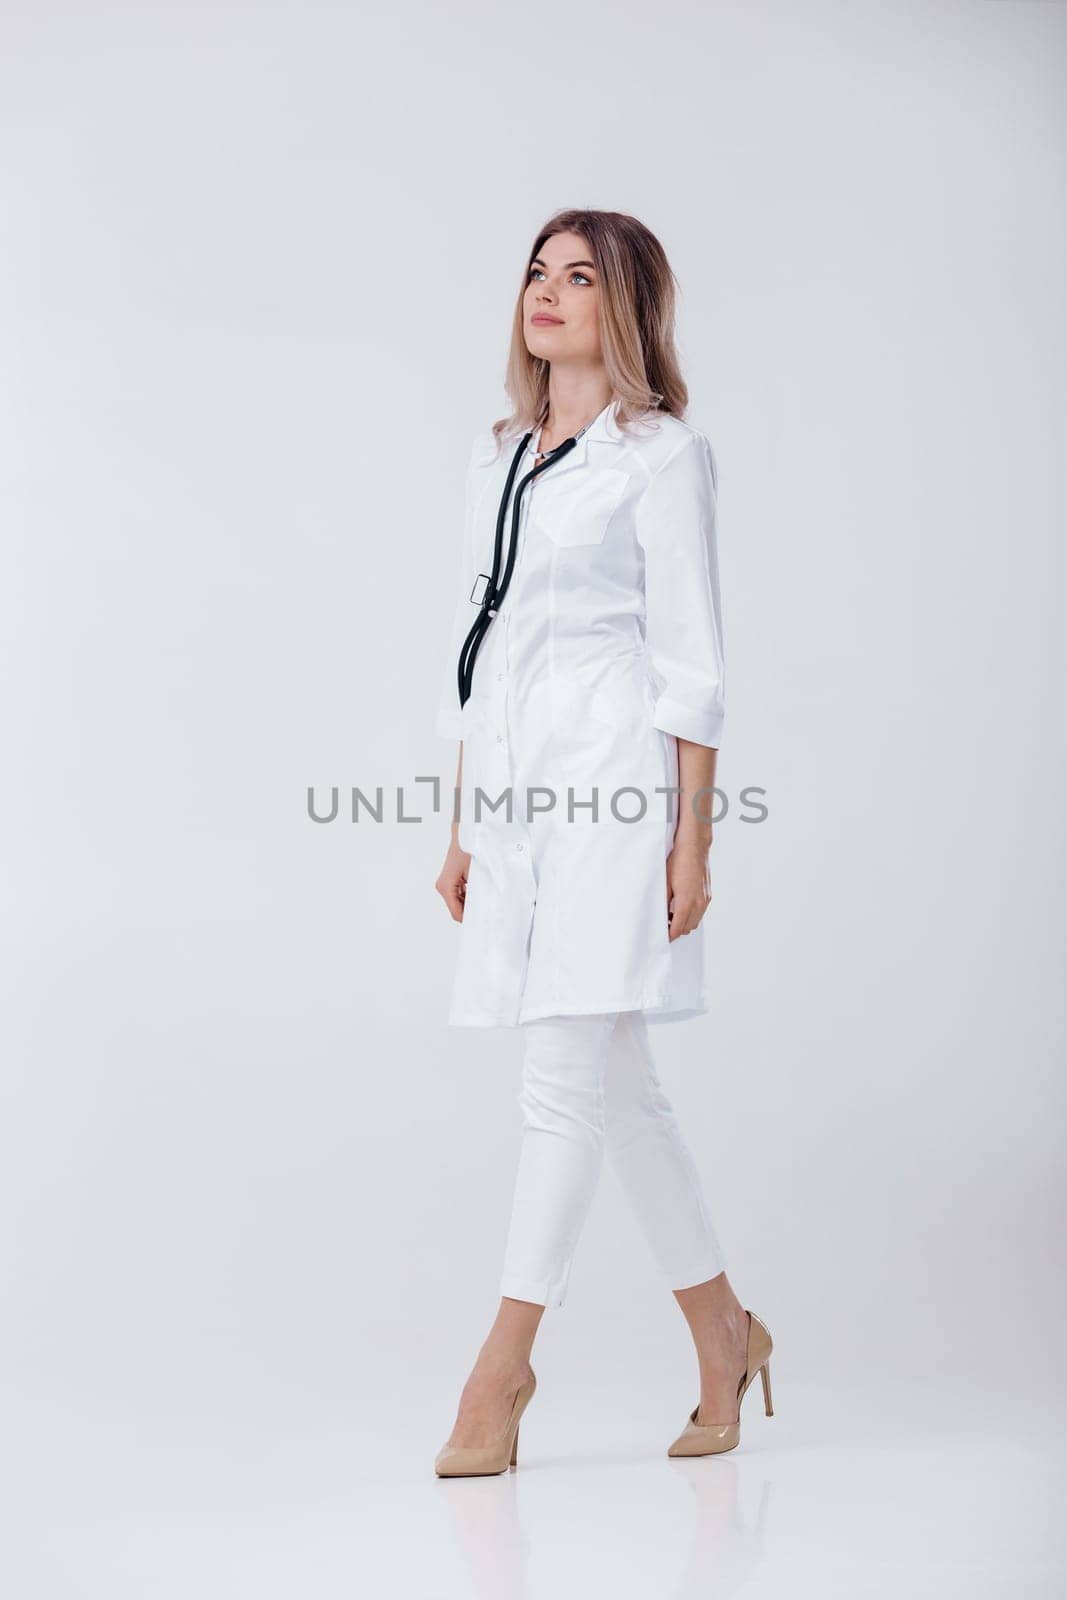 Full length portrait of medical physician doctor woman in white coat with stethoscope on light background.